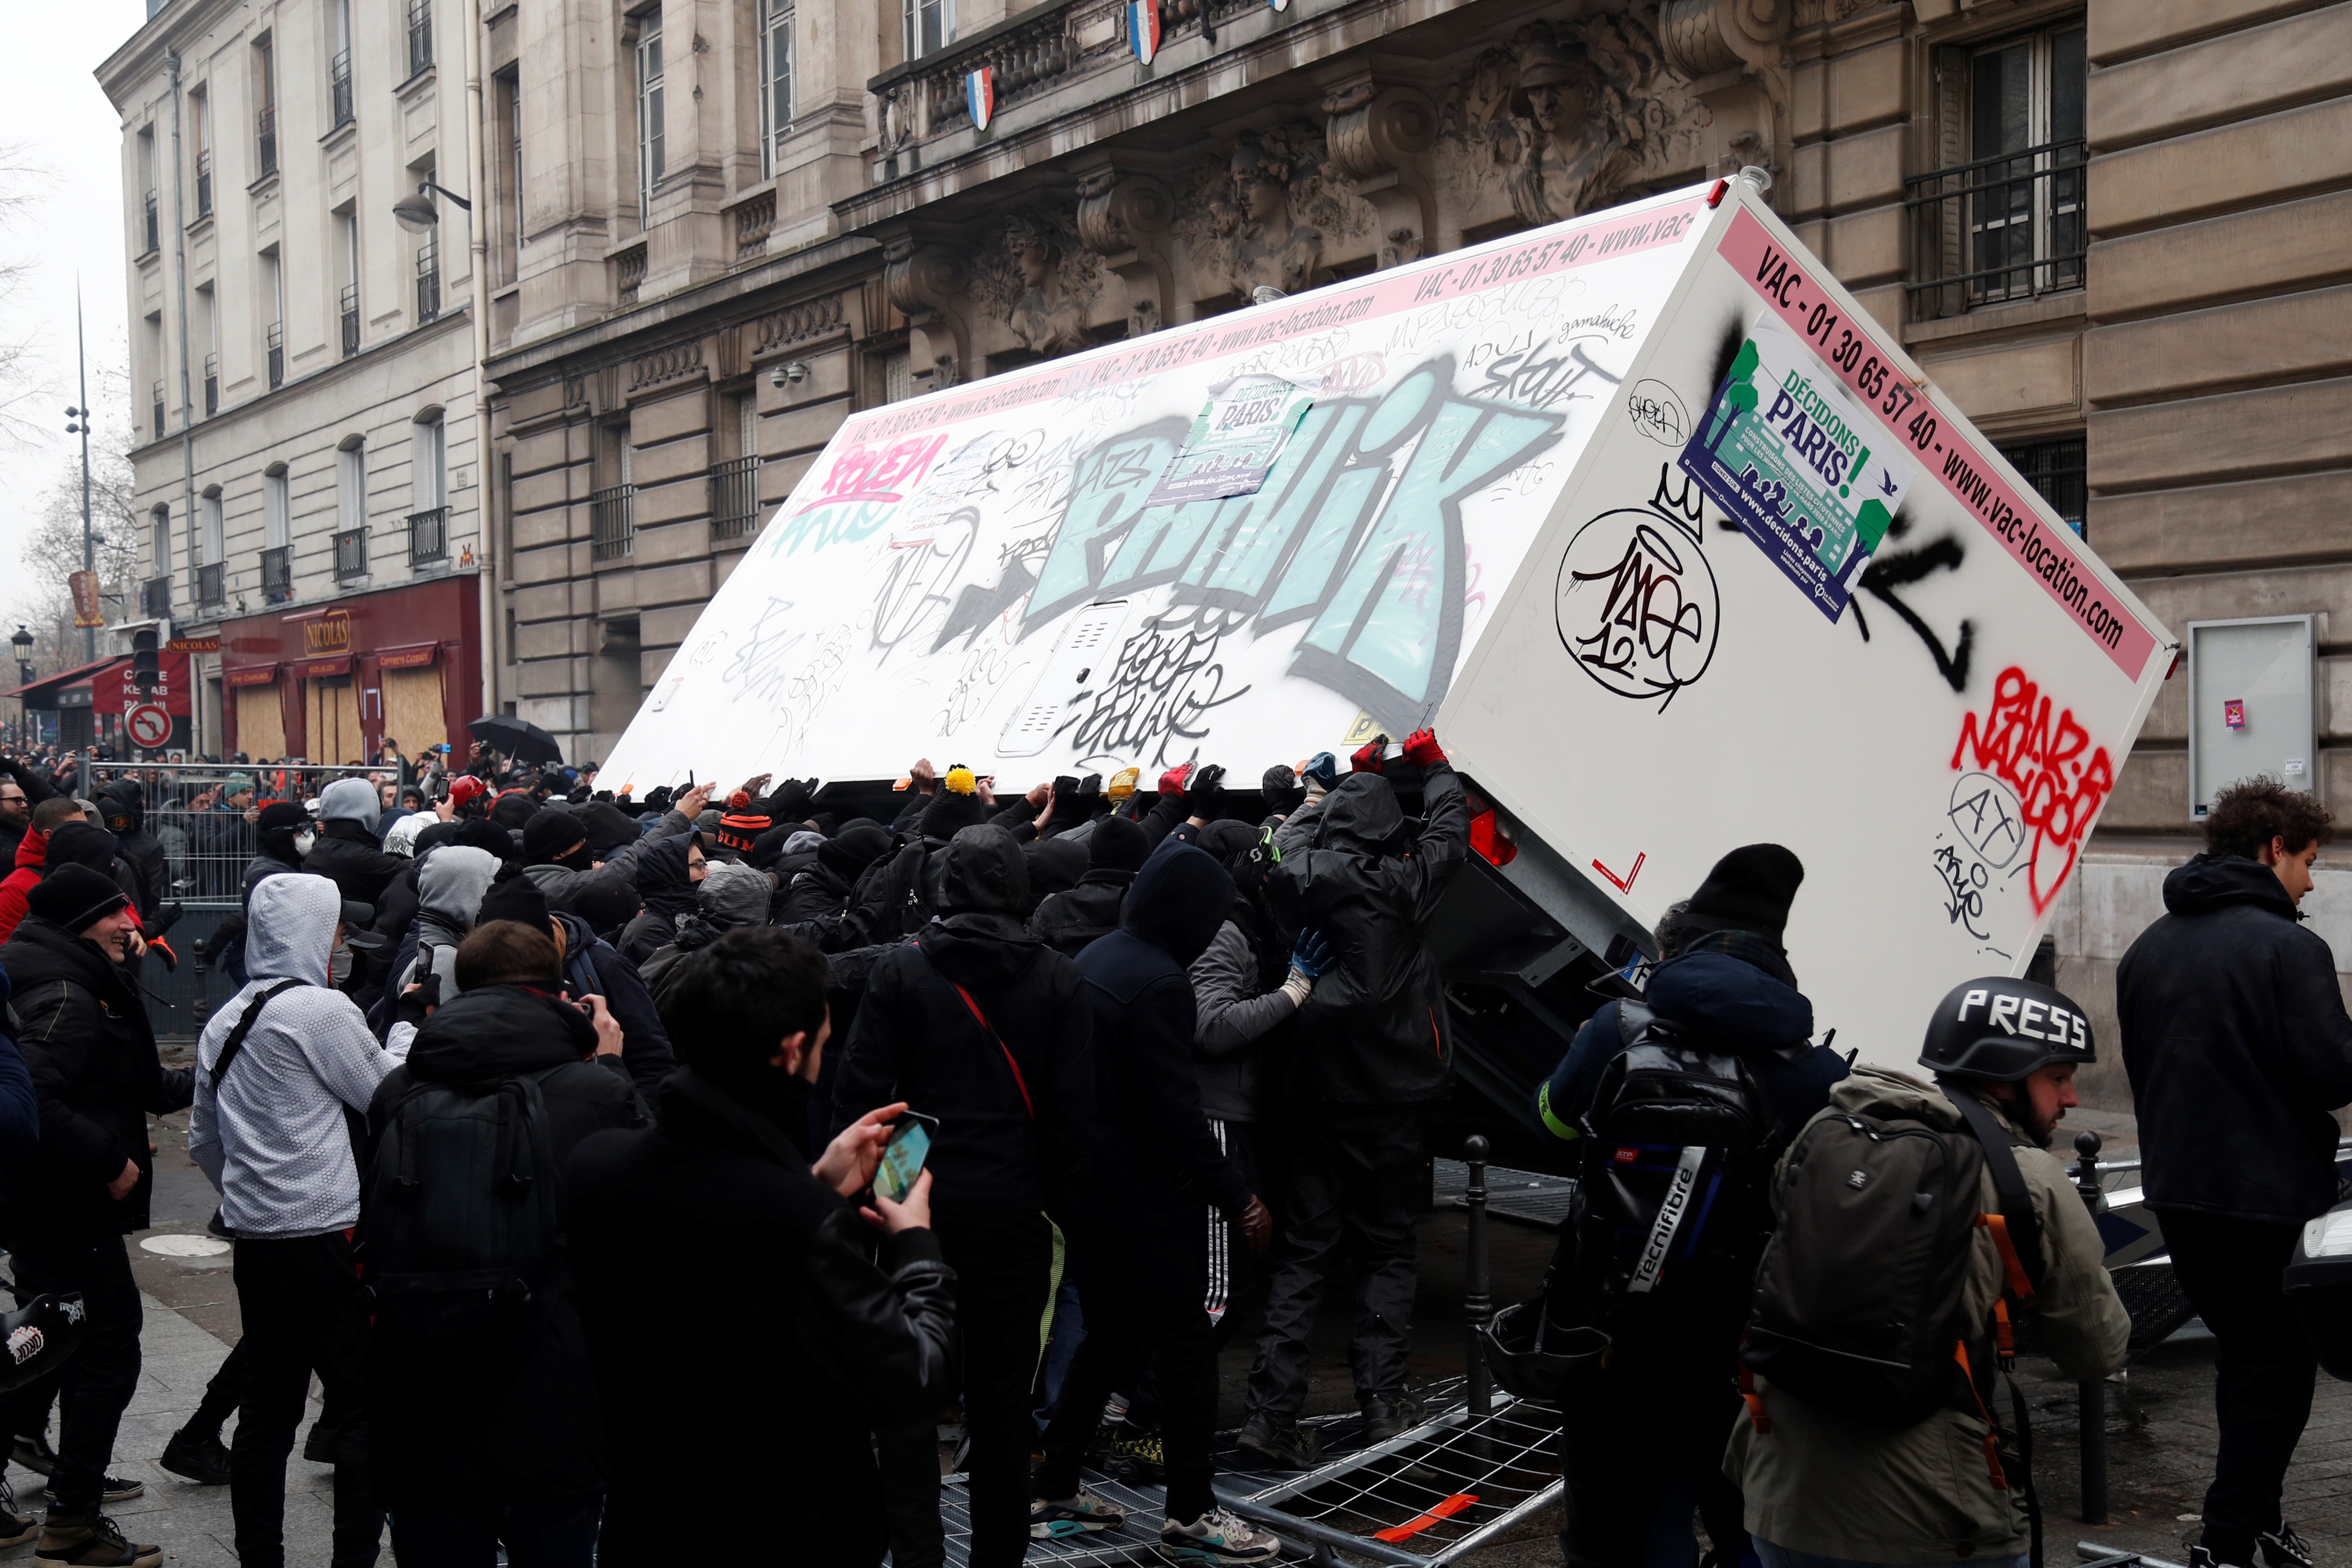 Demonstrators overturn a container in Paris